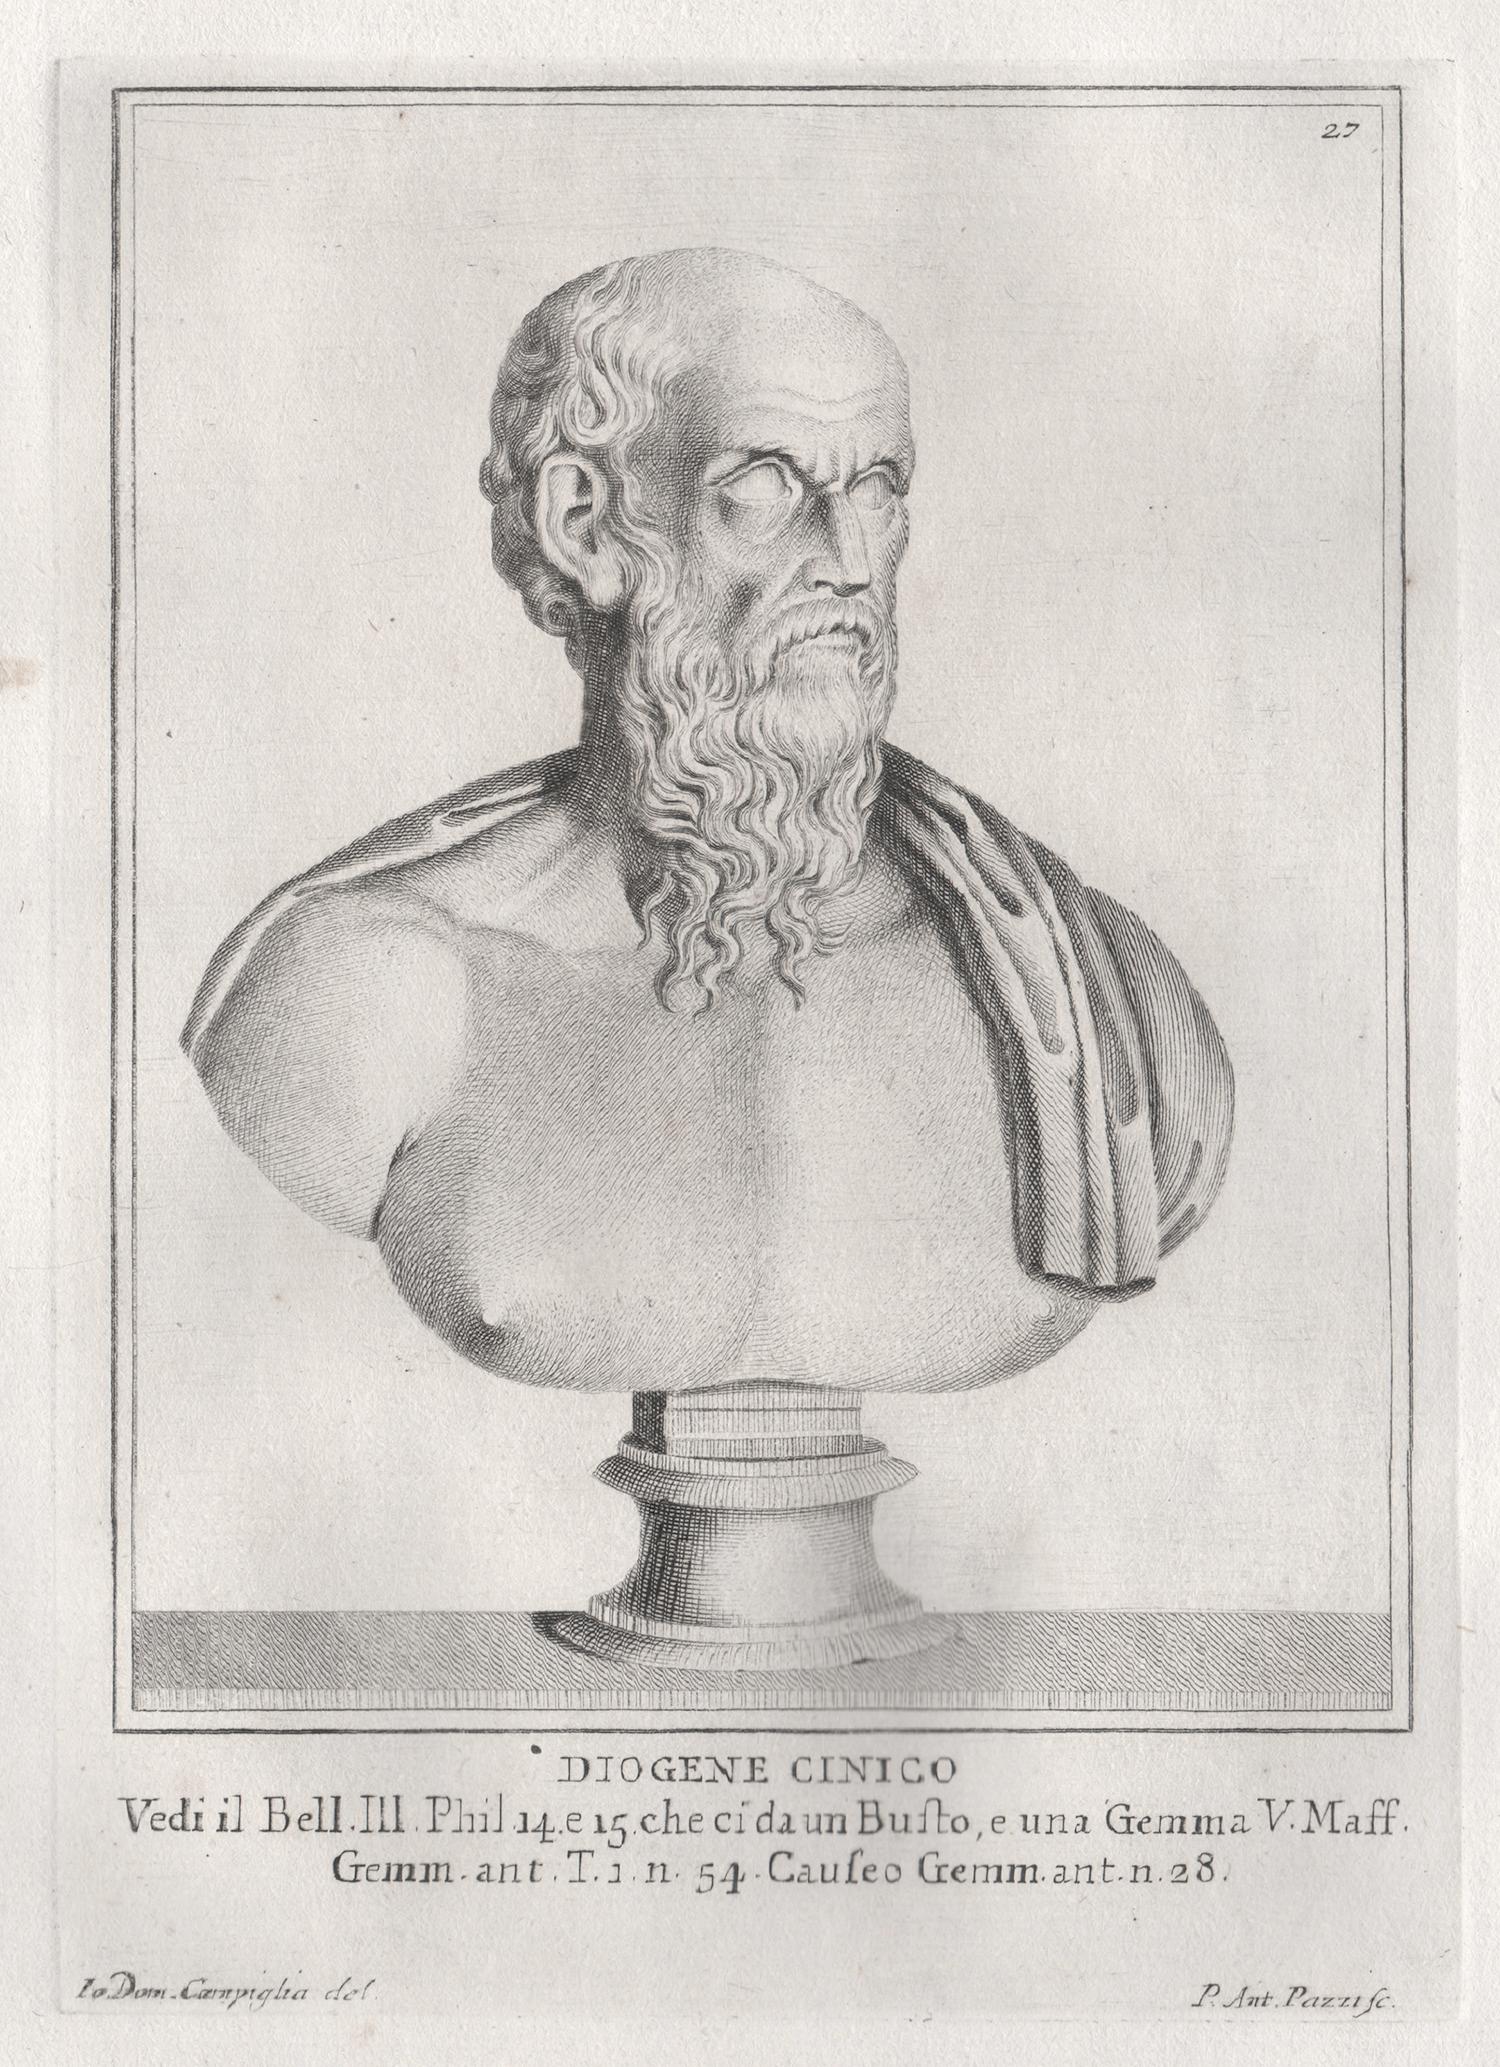 Pazzi after Giovanni Domenico Campiglia Portrait Print - Diogenes the Cynic, Greek philosopher. C18th Grand Tour Roman bust engraving